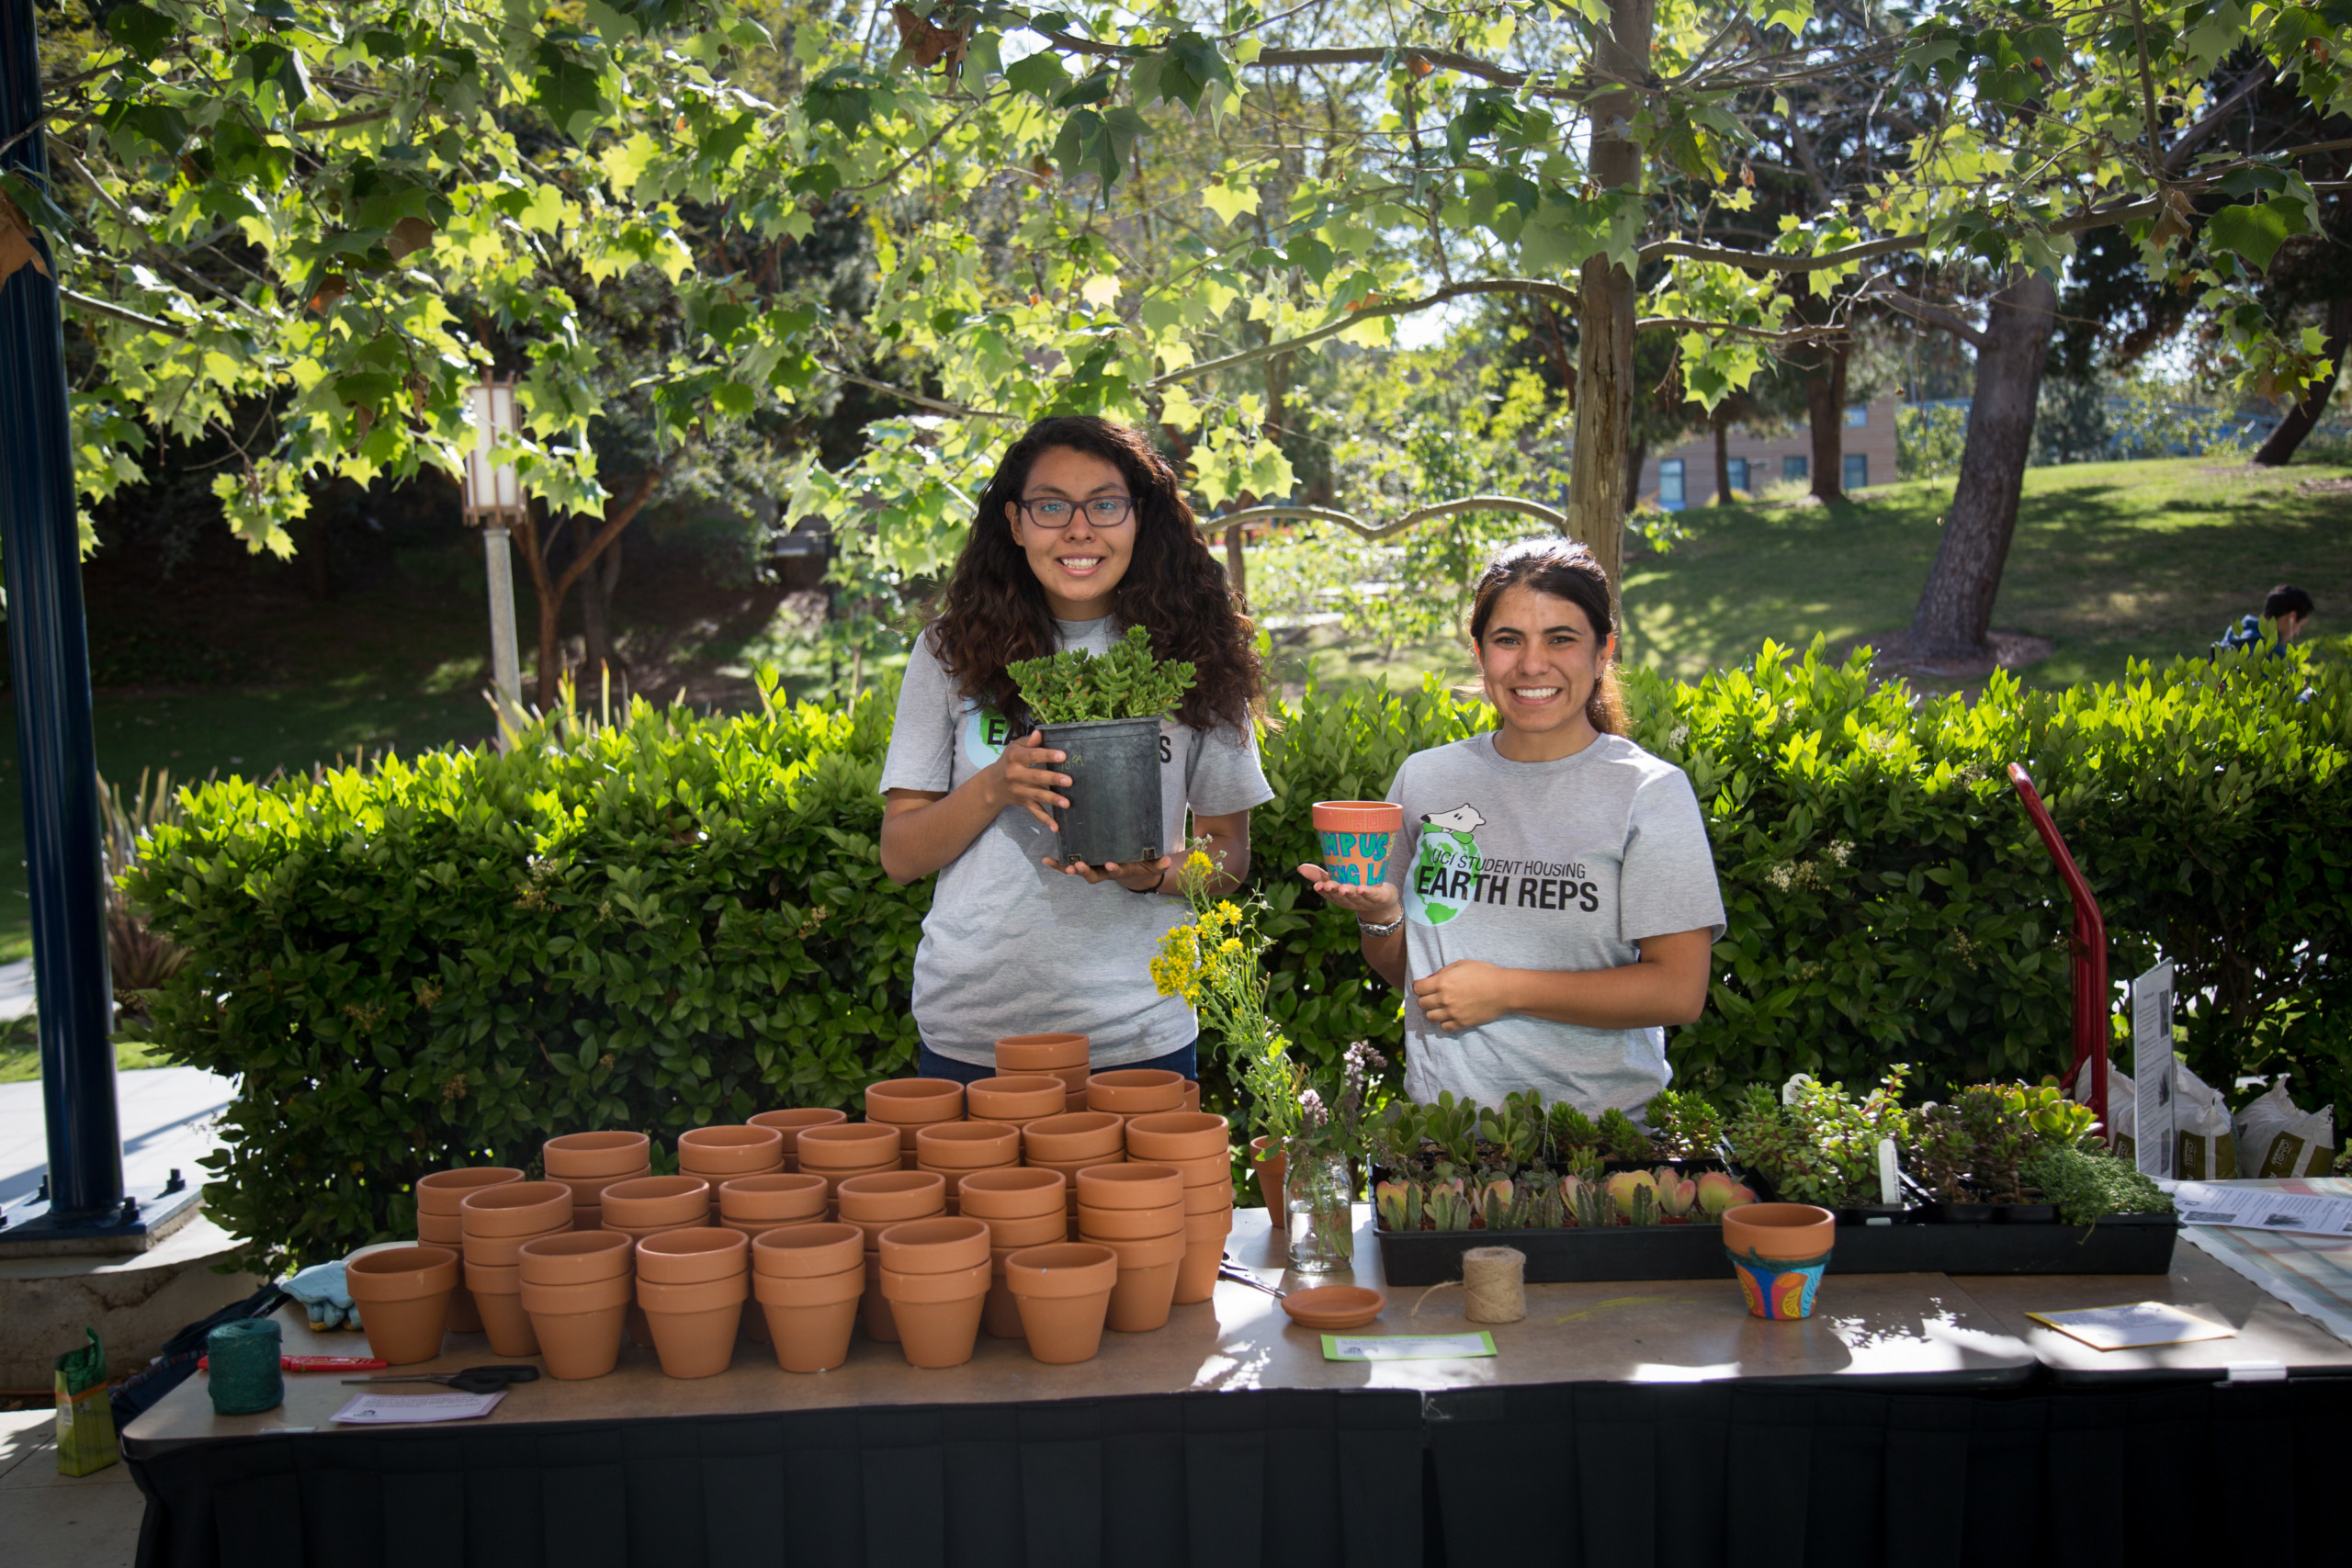 Two woman smile, holding potted plants in garden.